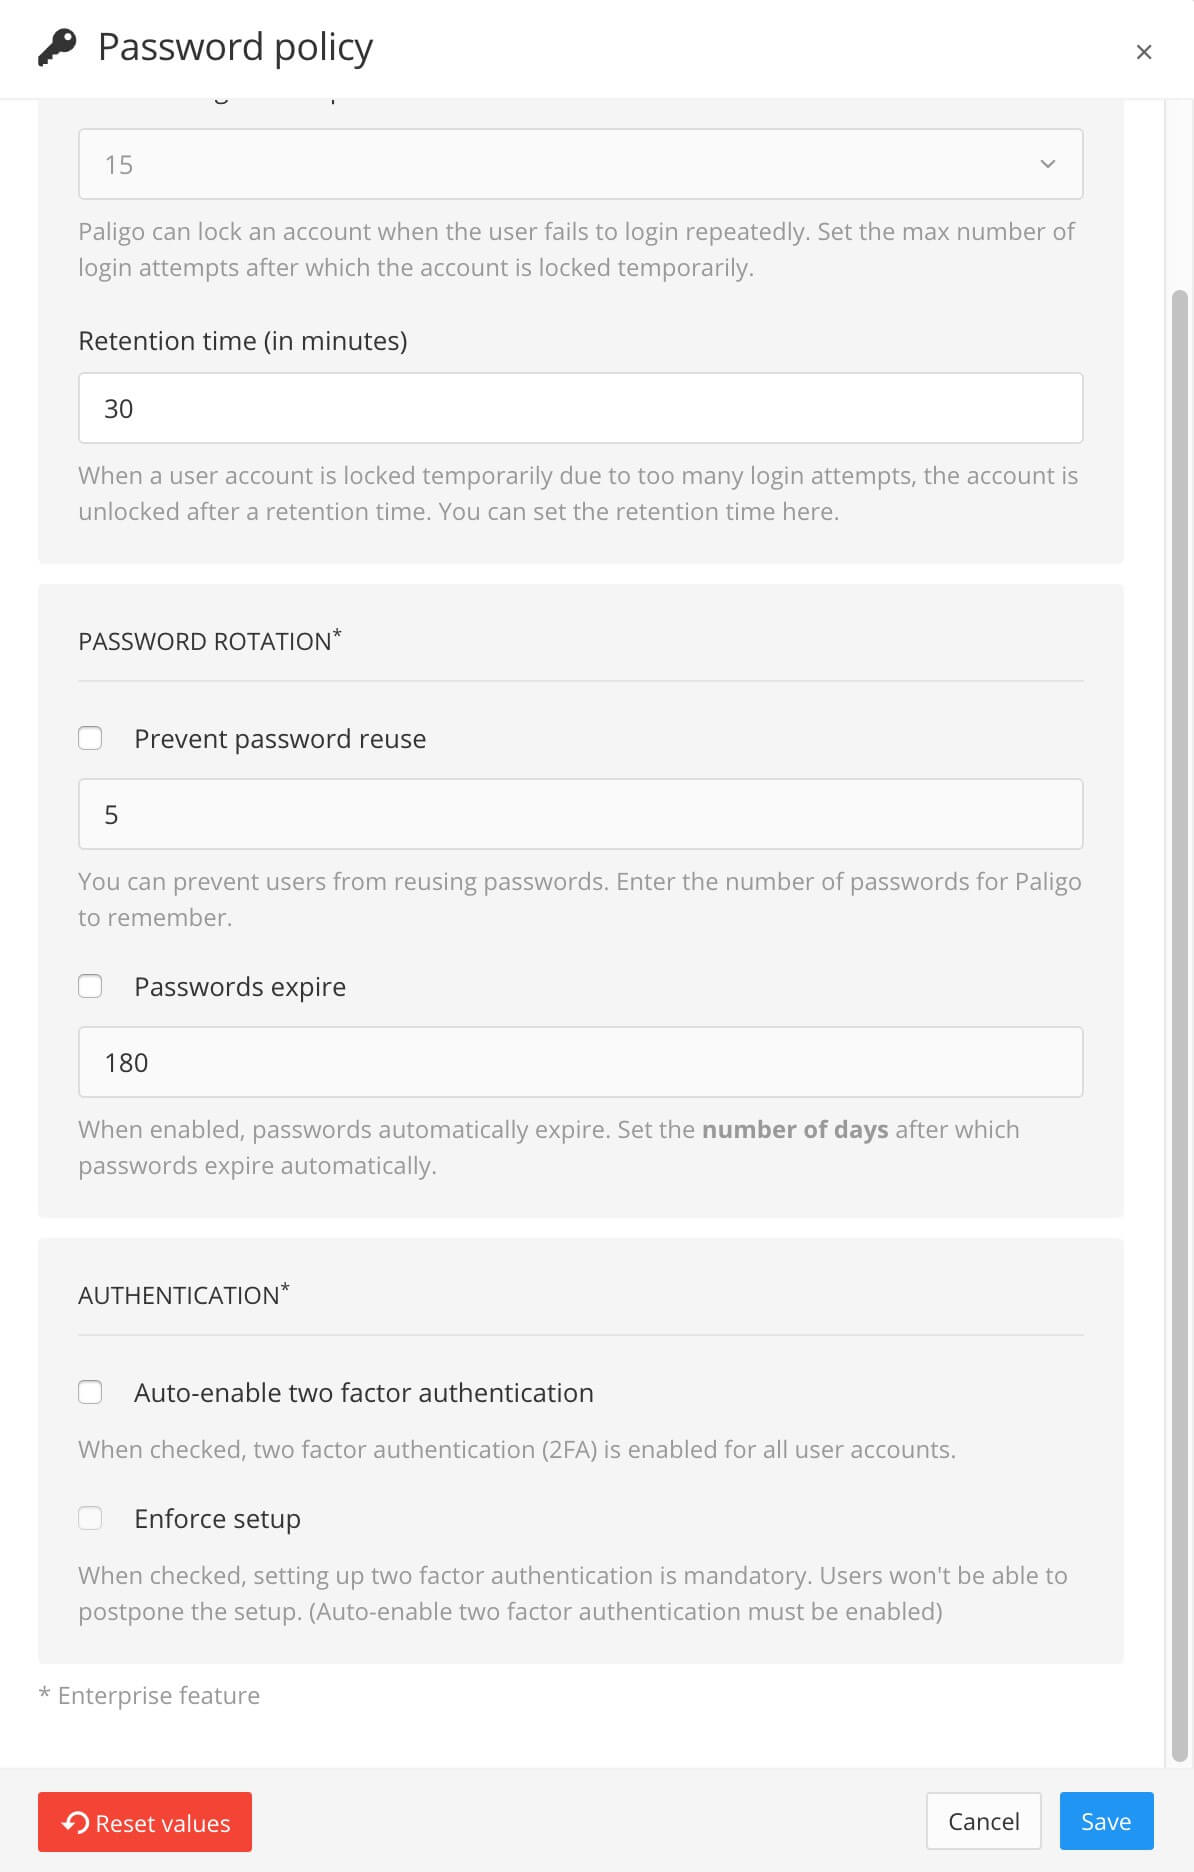 Password Policy dialog showing various settings, including the Authentication settings for two-factor authentication.